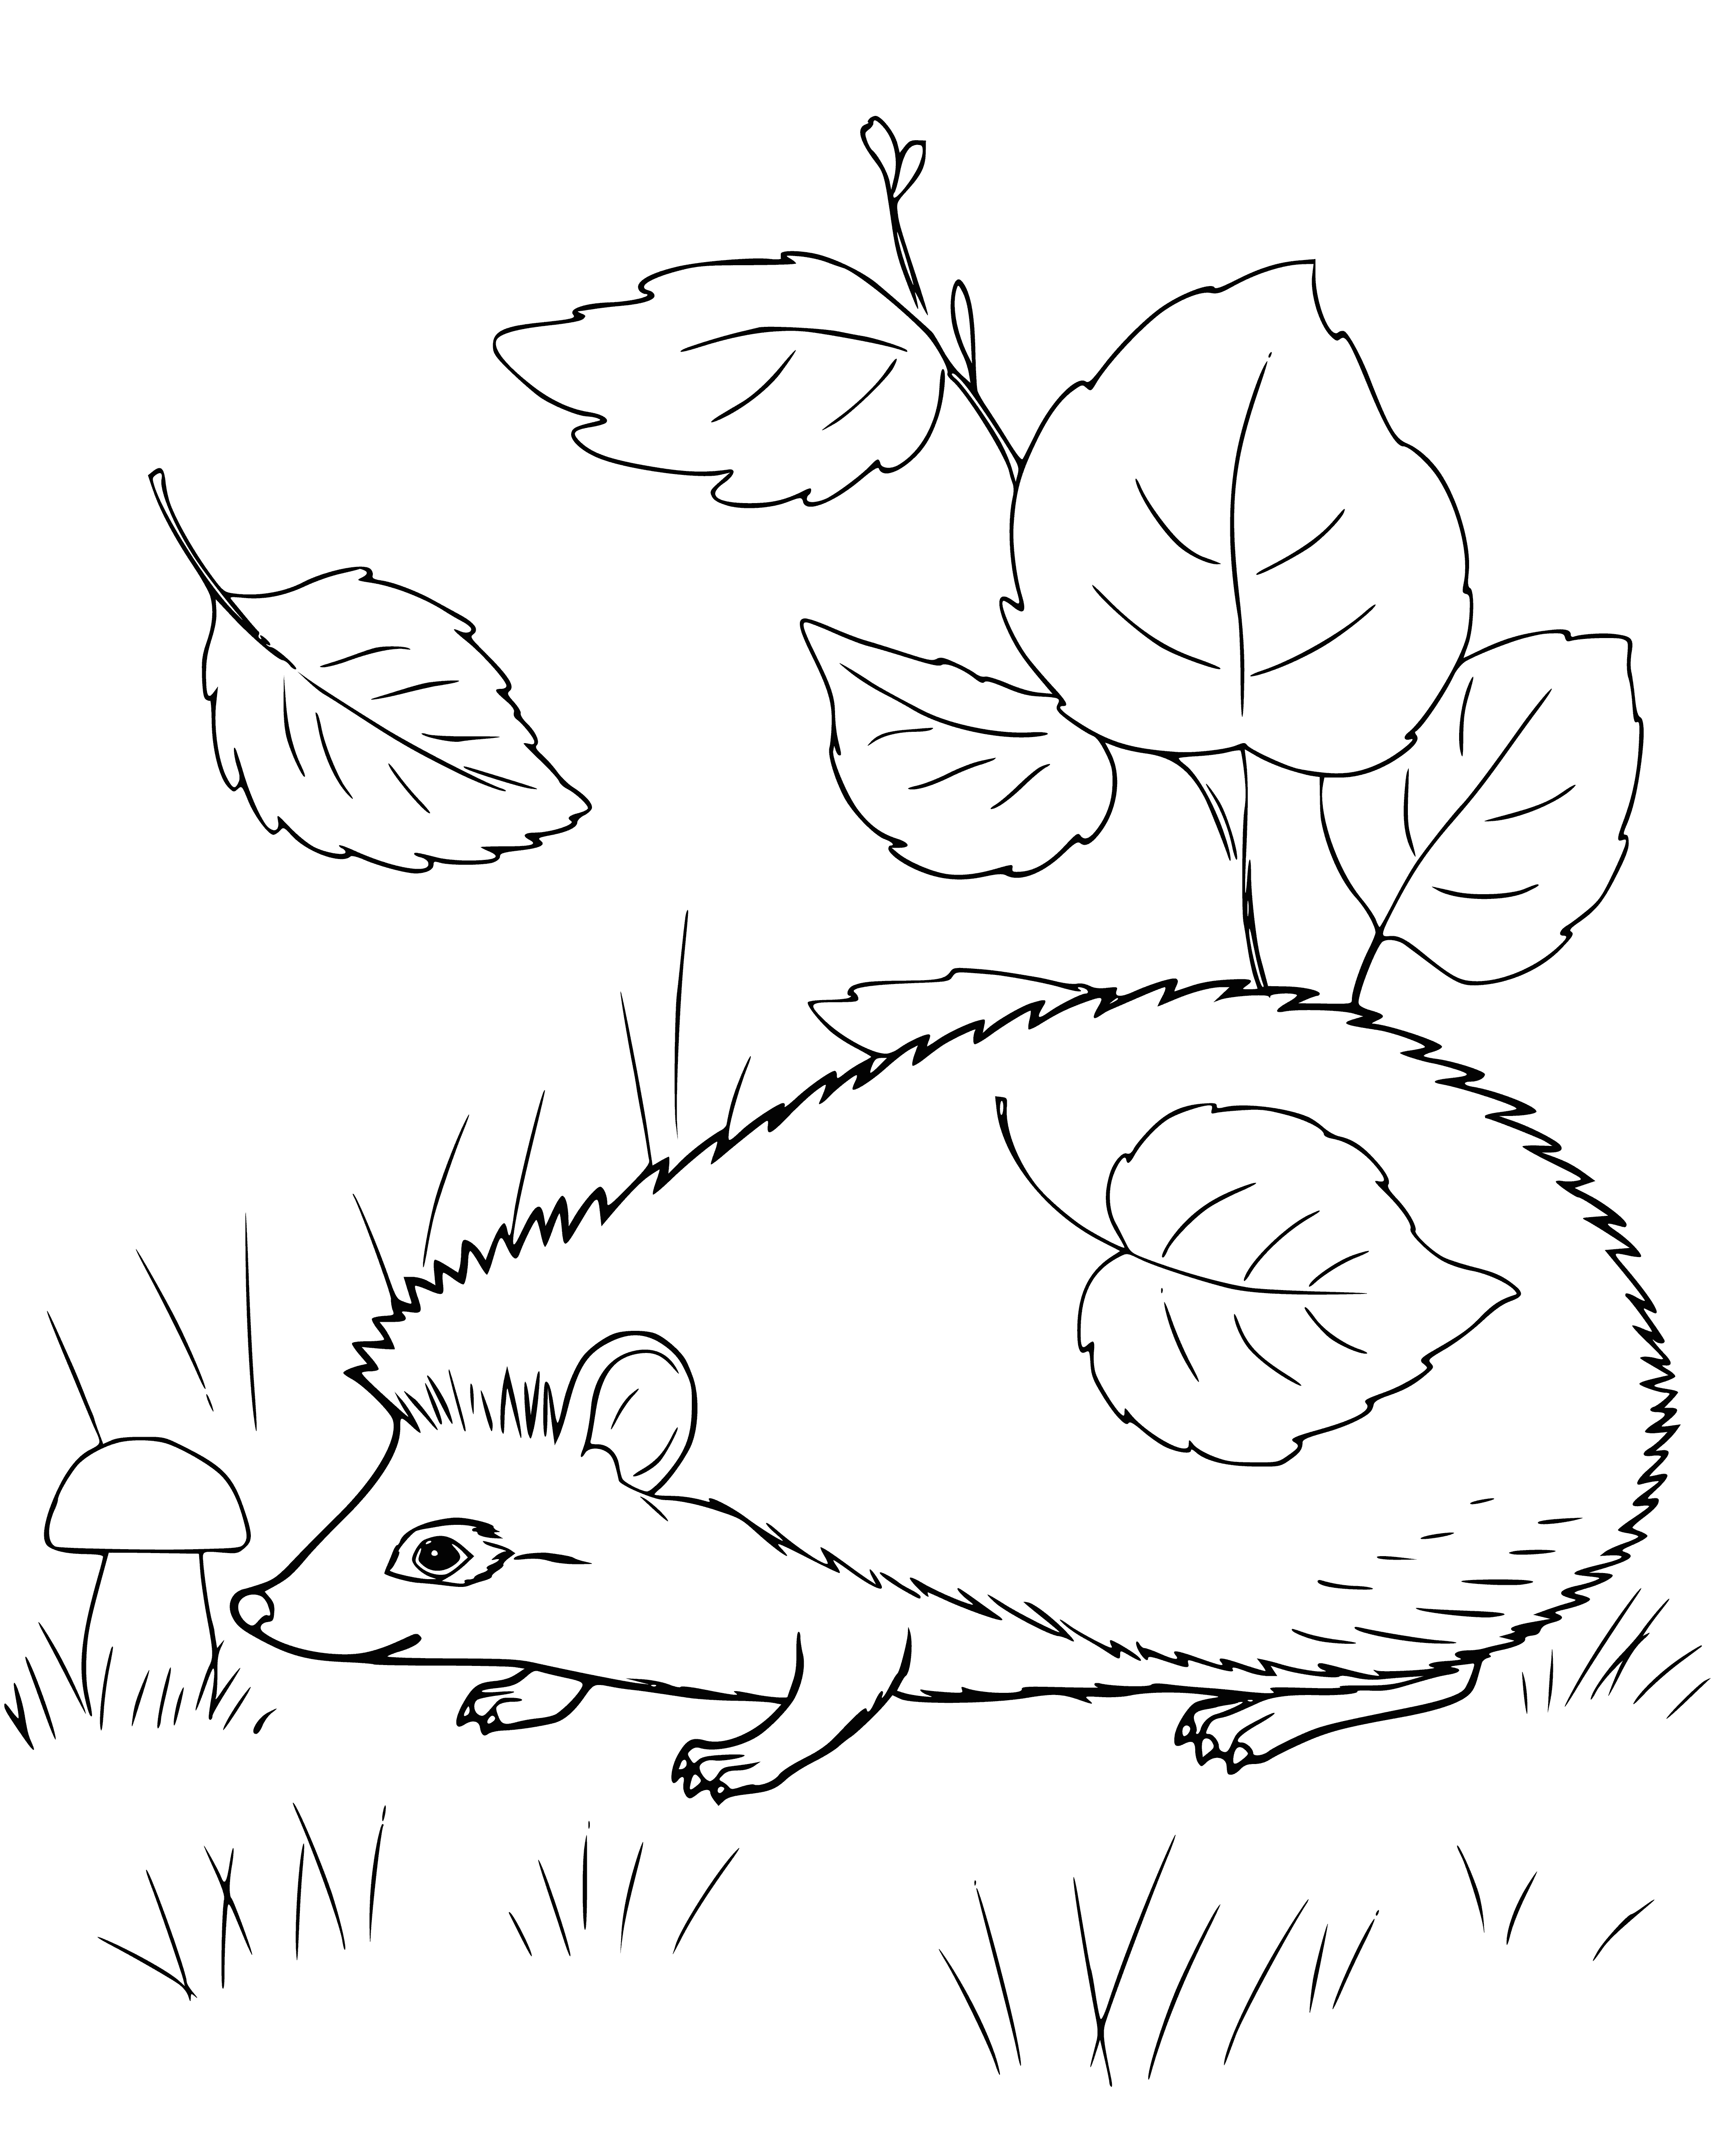 coloring page: A hedgehog lounges in the grass, pink toes and nose peeking through relaxed quills. Eyes closed in contentment.